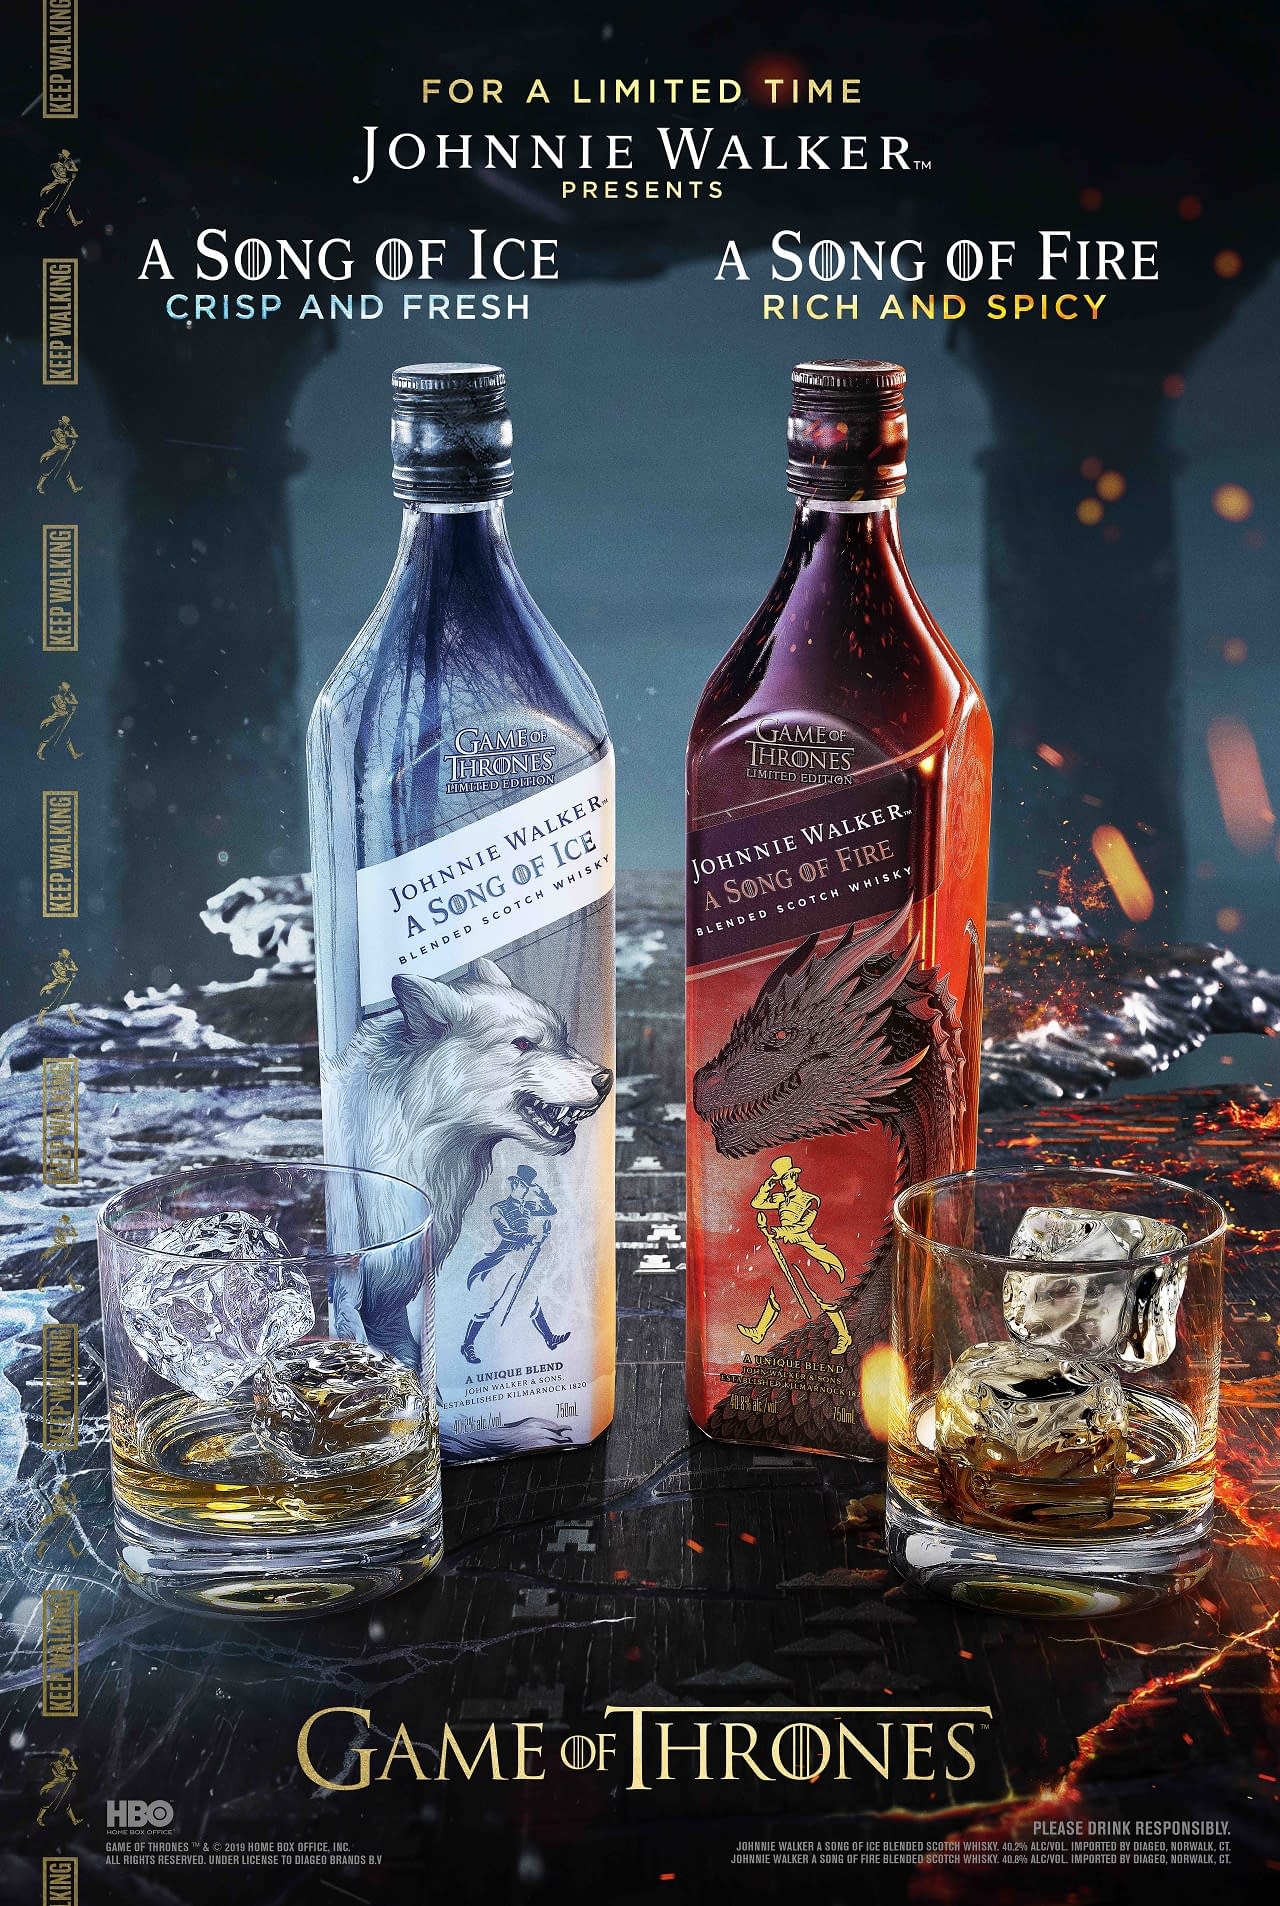 At Least "Game of Thrones" Fans Won't Have to Wait for Next Bottle of HBO, Johnnie Walker's New Scotch Whiskies [VIDEO]